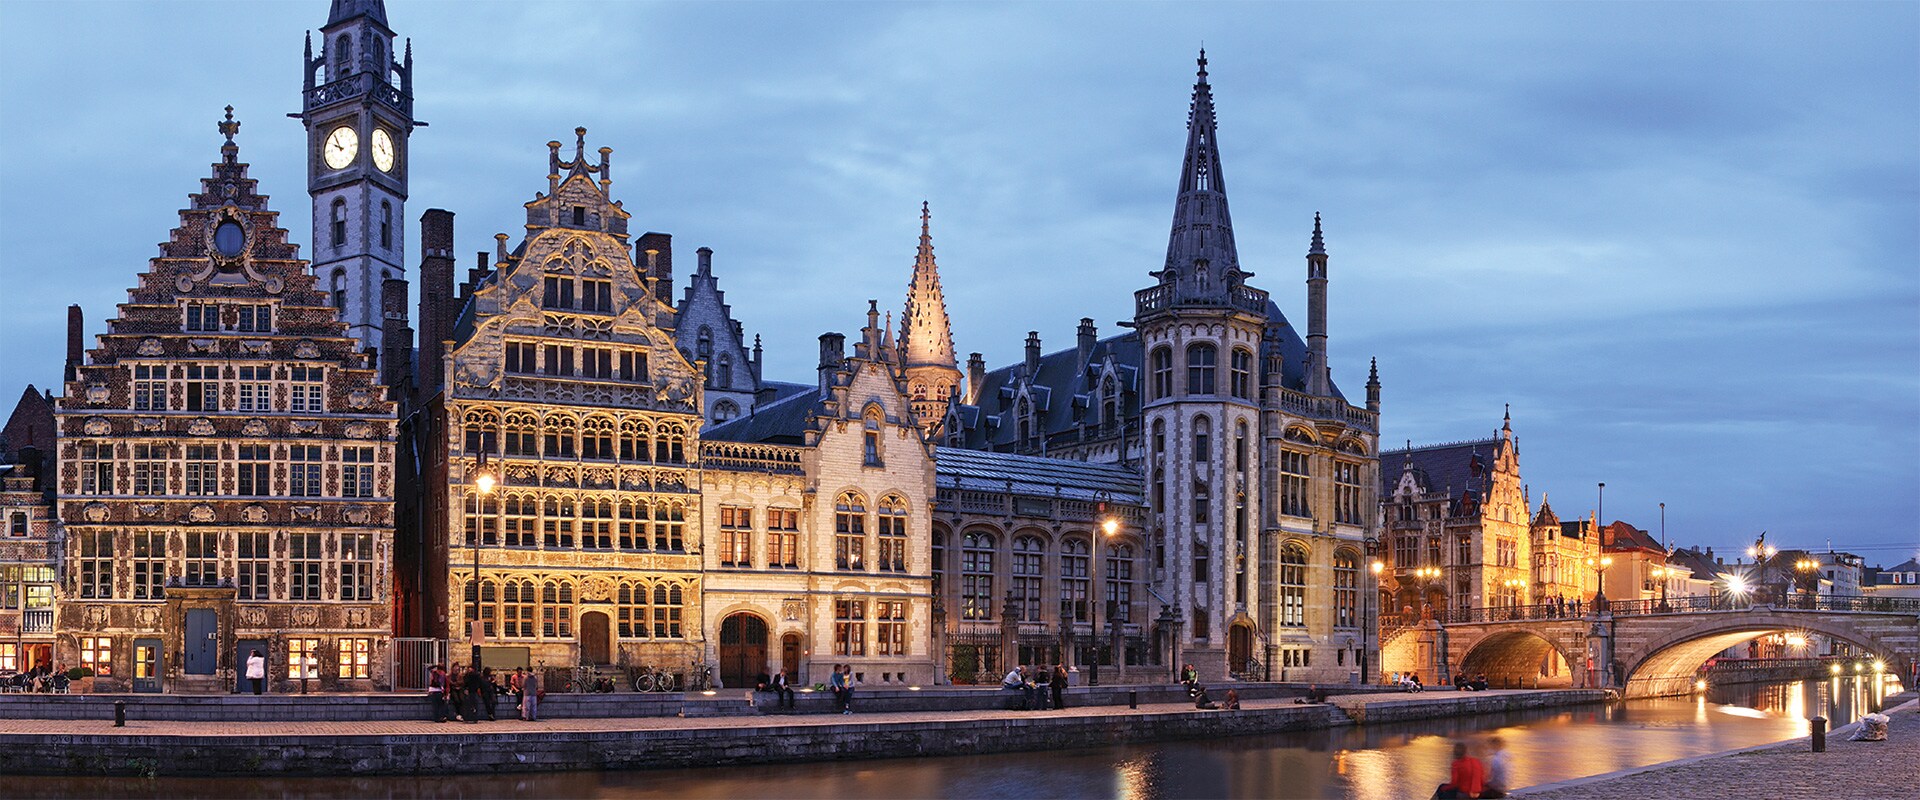 Ghent's medieval buildings along the channel, illuminated under the night sky